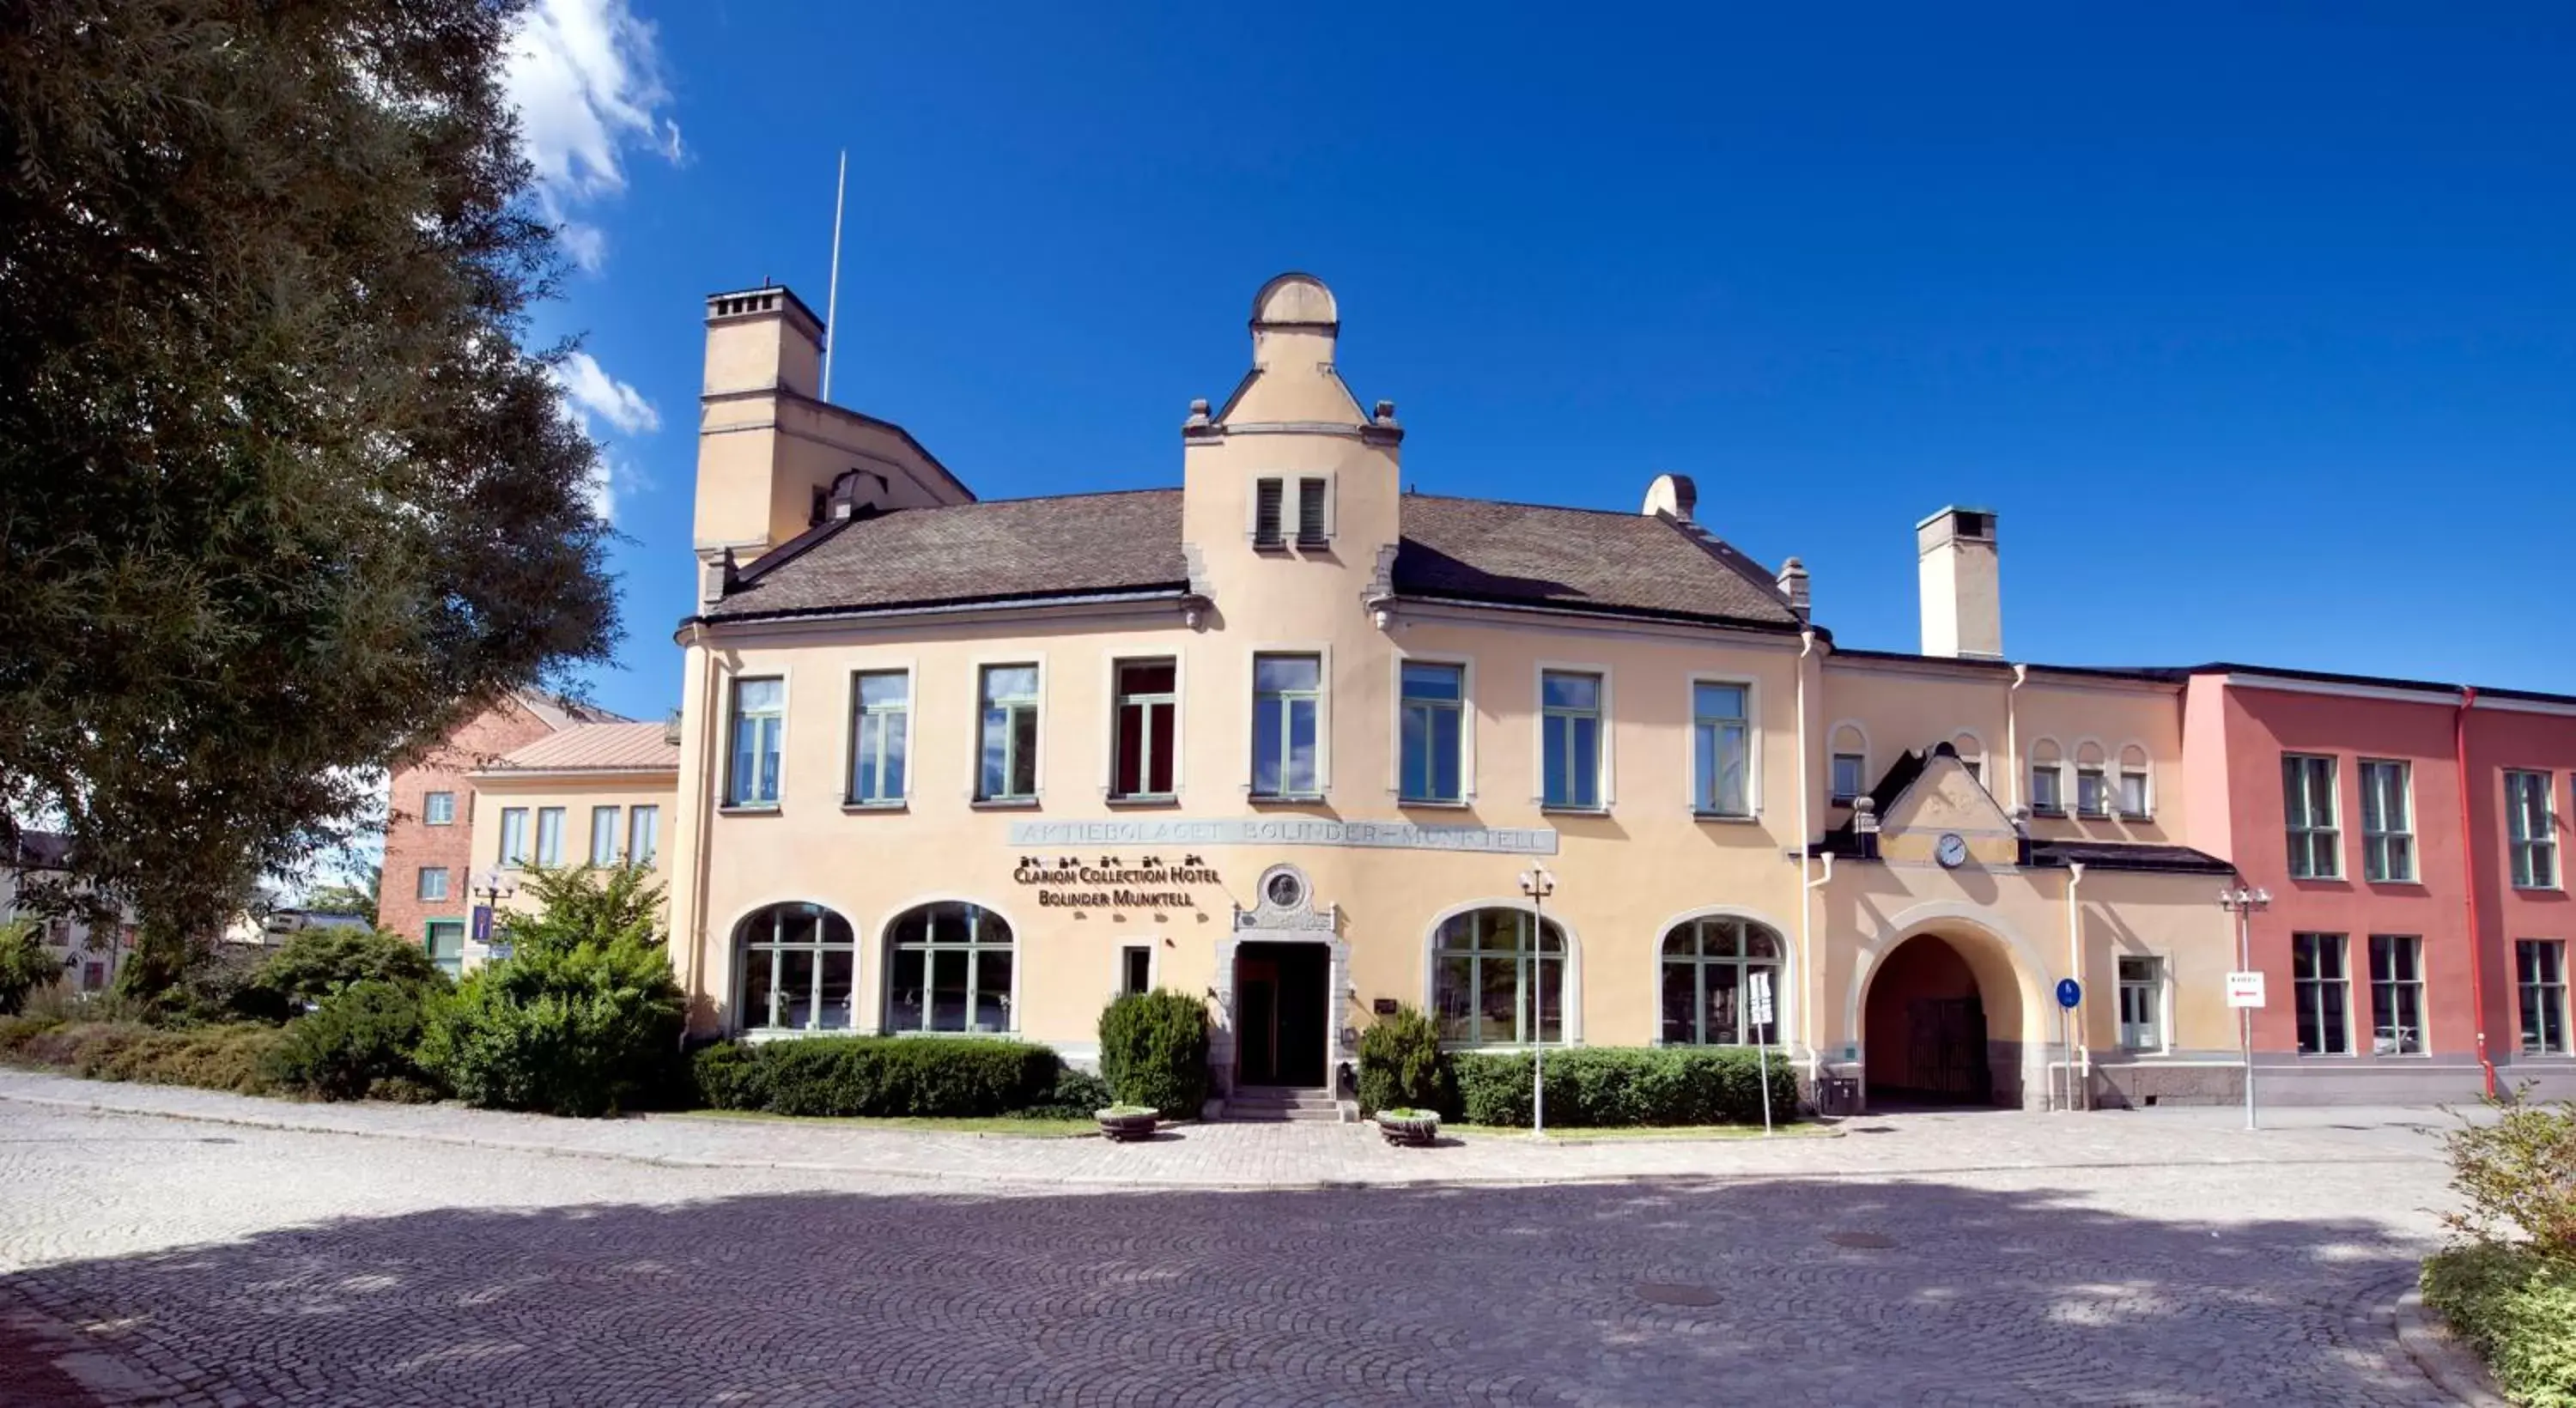 Property building in Clarion Collection Hotel Bolinder Munktell